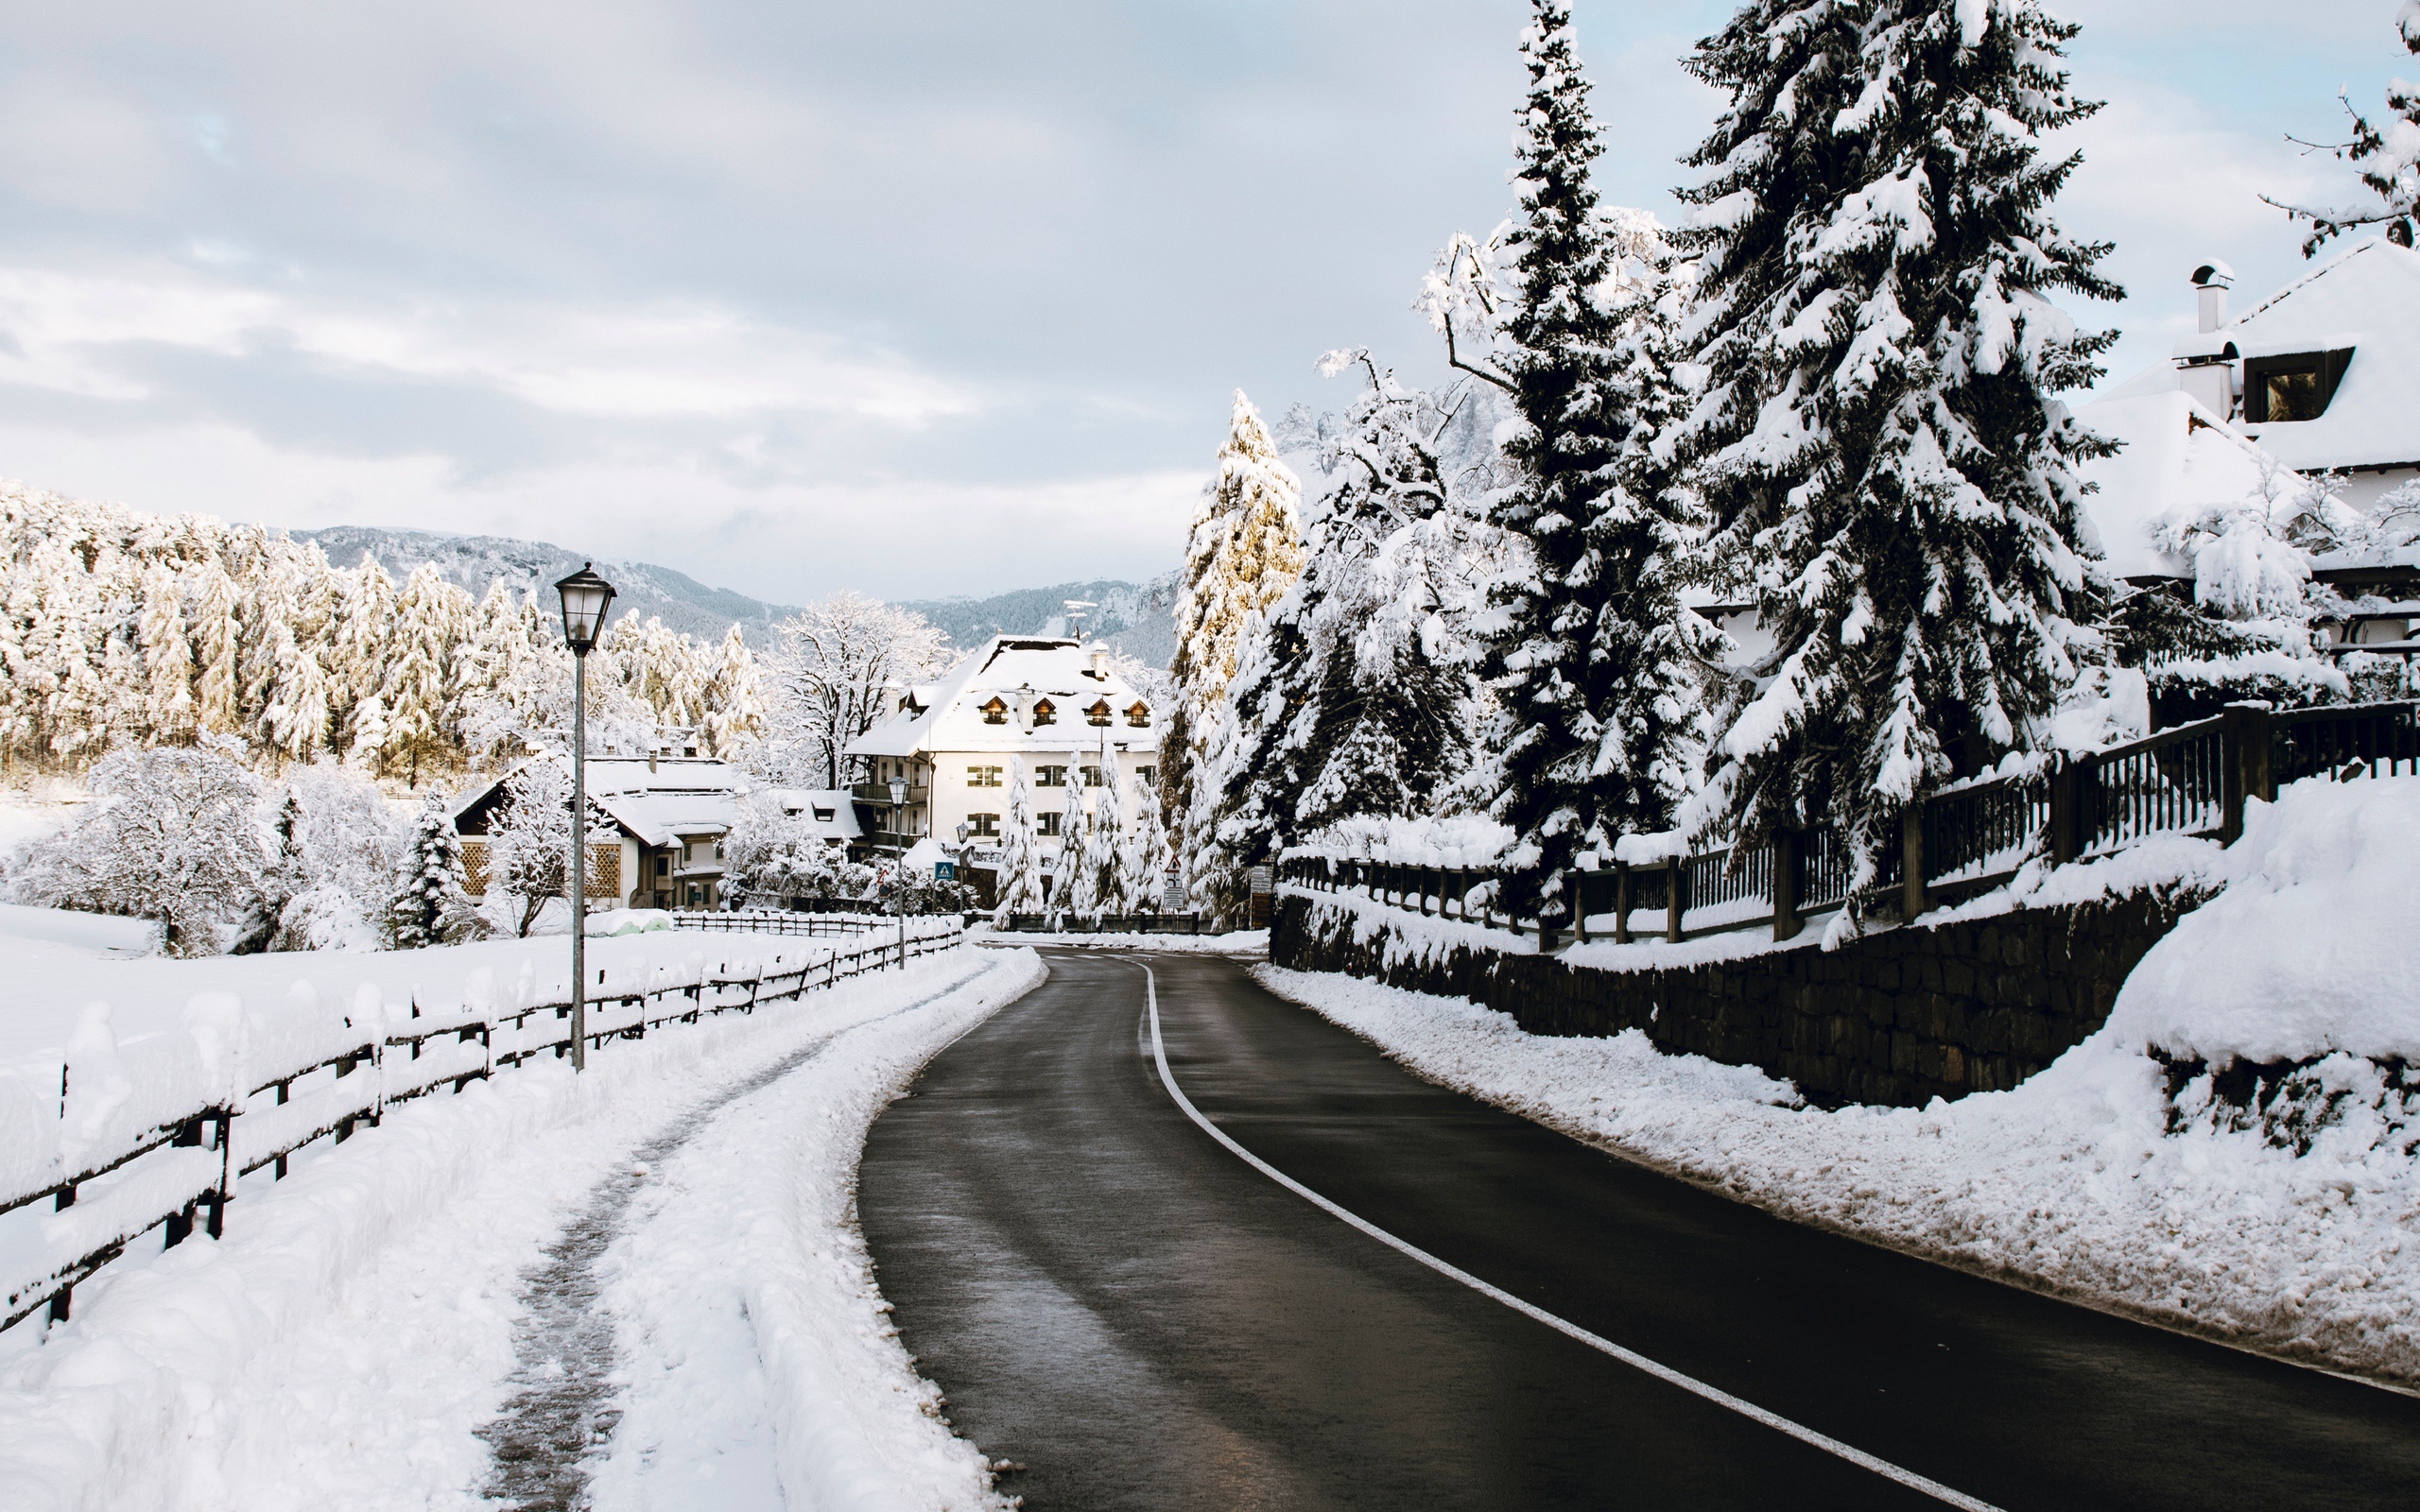 man made, road, italy, nature, snow, town, tyrol, winter